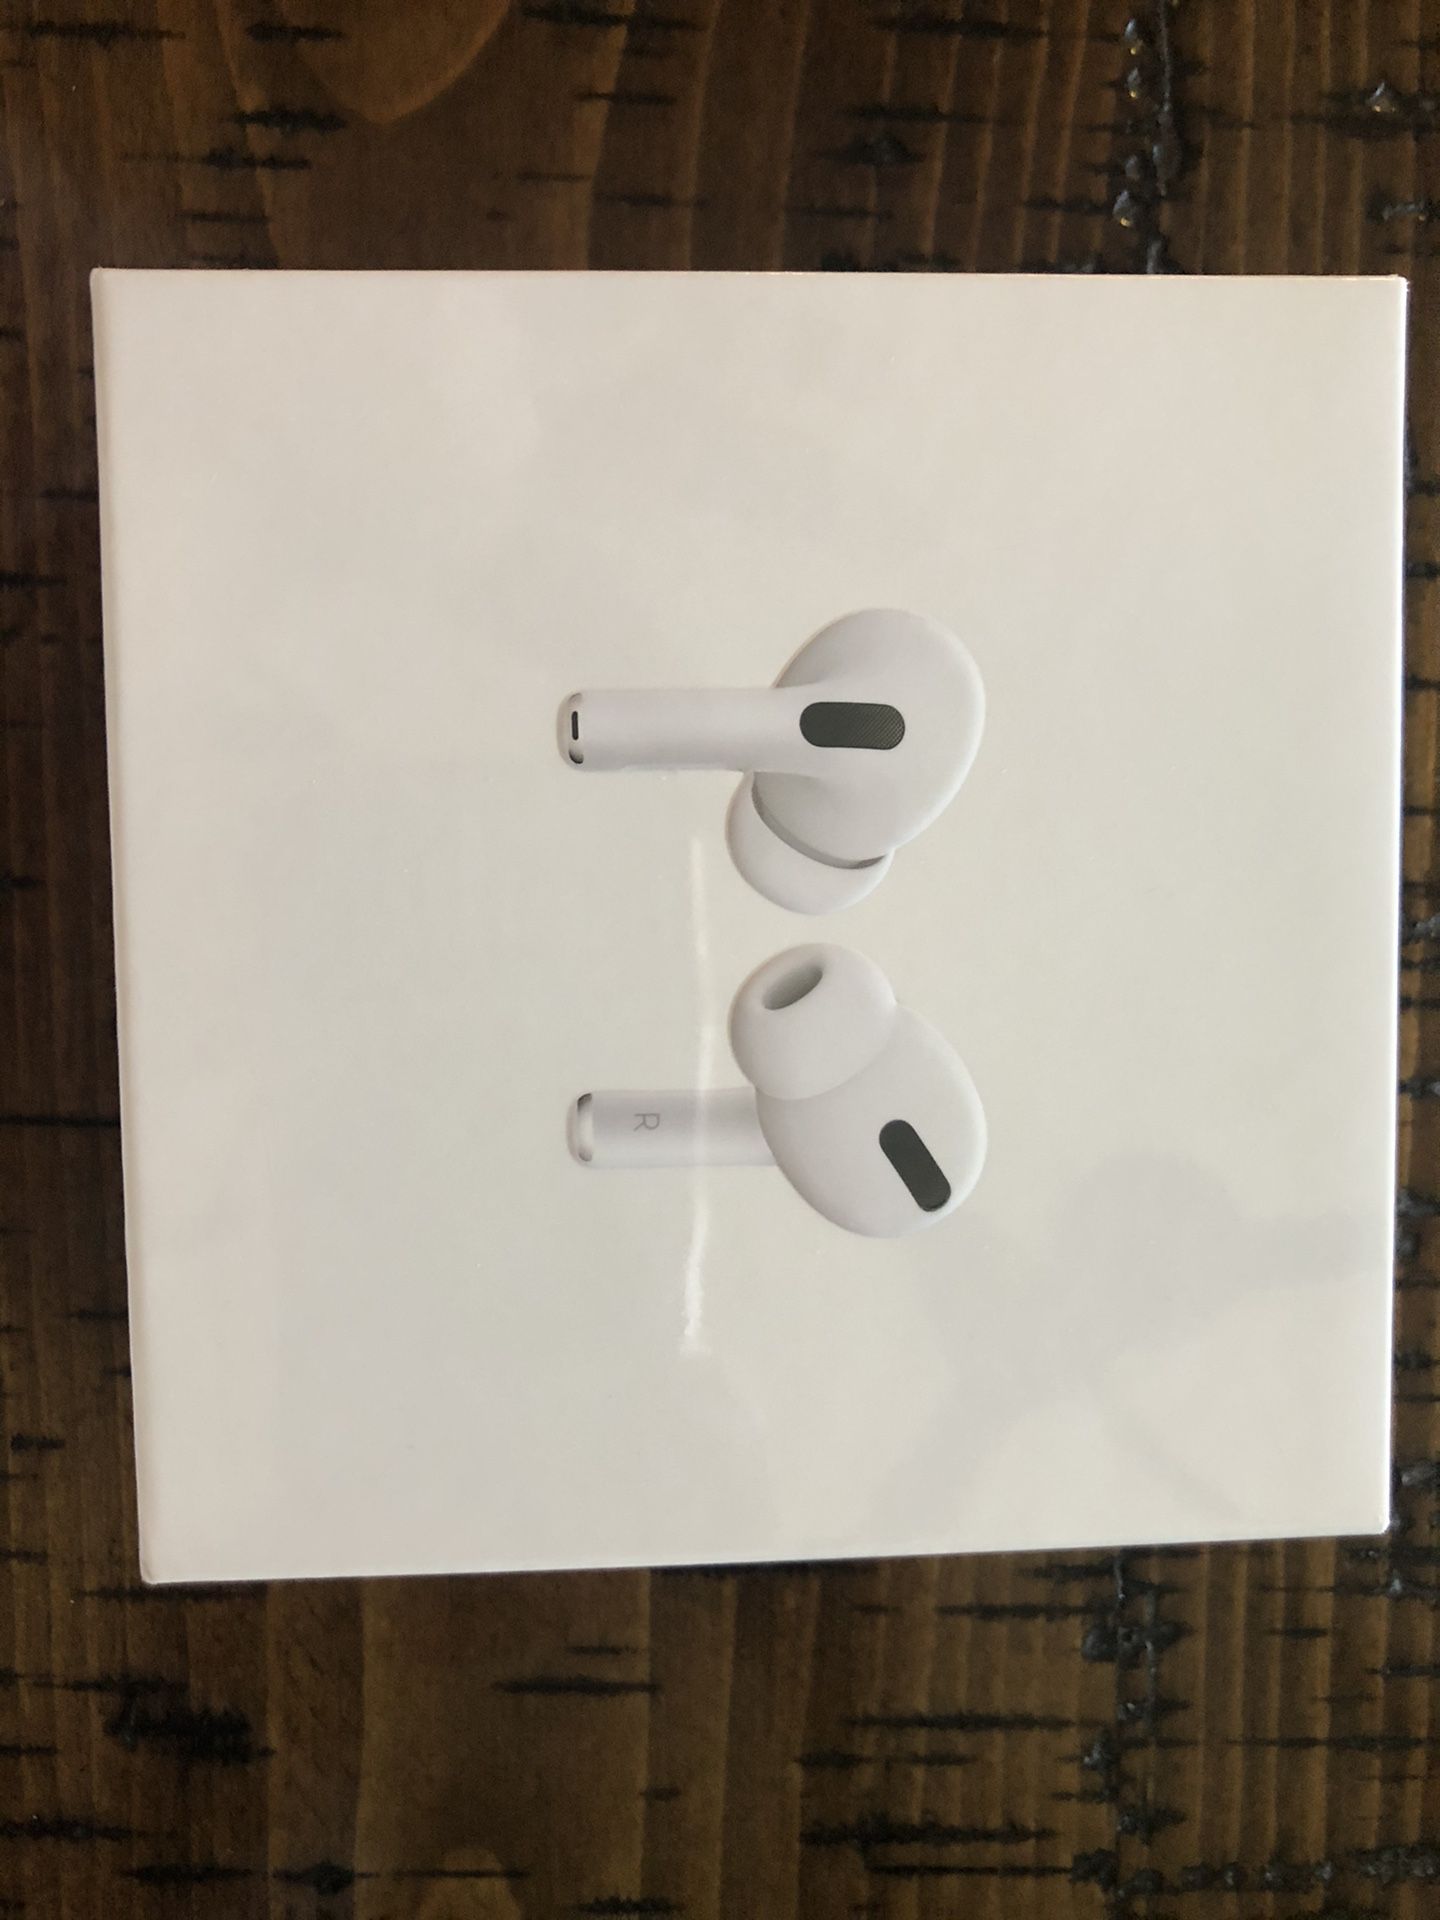 AirPods pro - Brand new